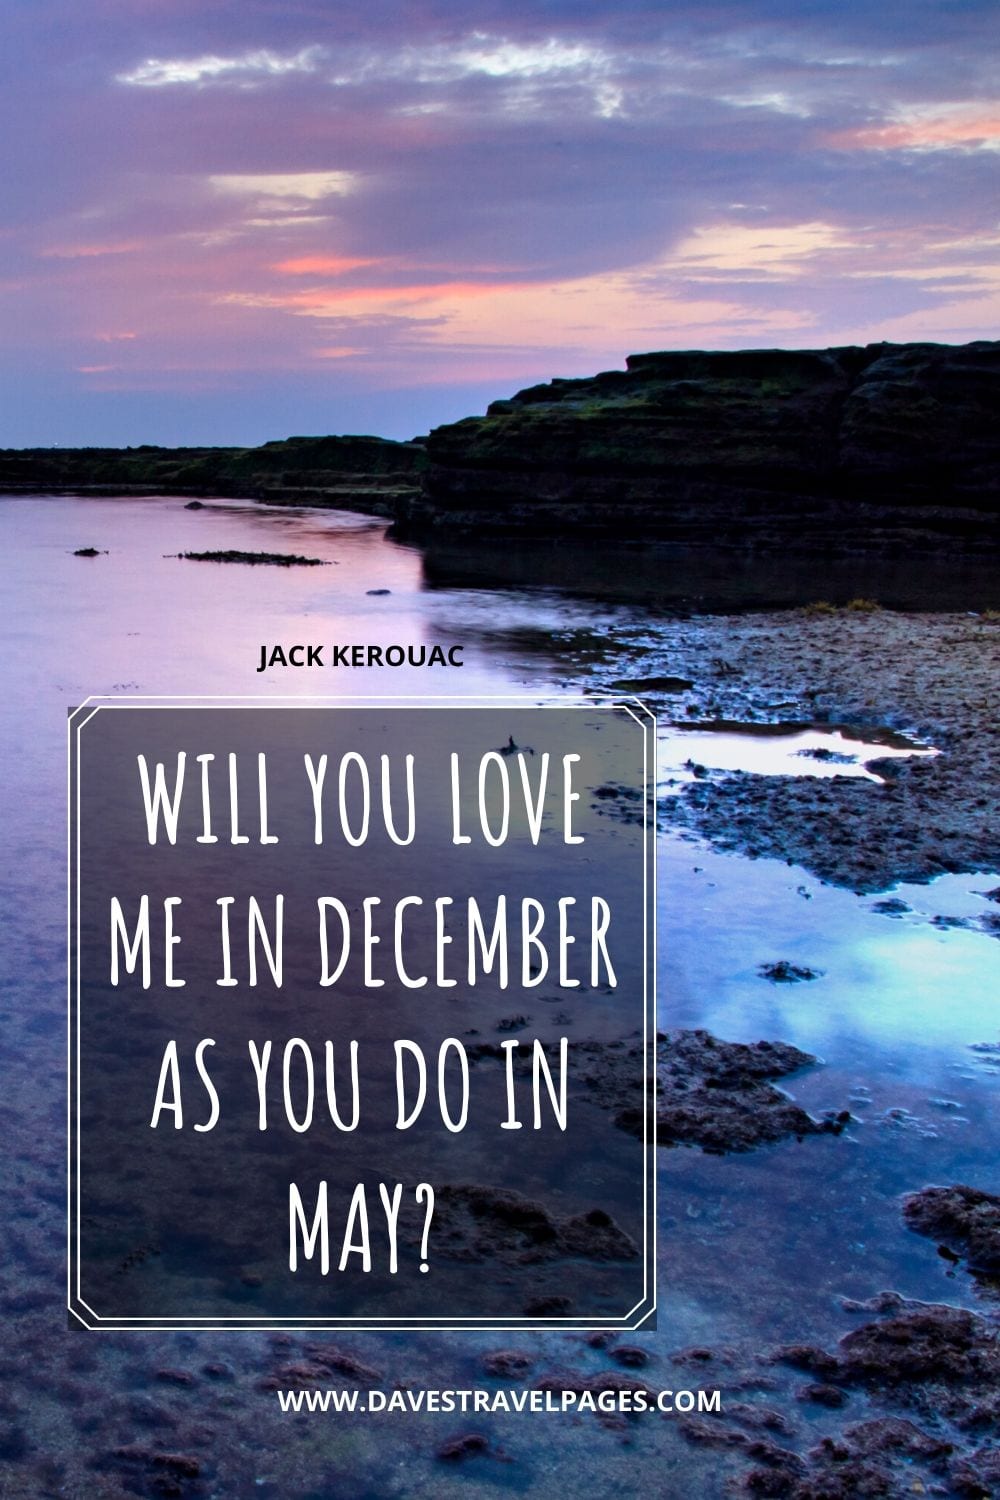 “Will you love me in December as you do in May?” - Attributed to Jack Kerouac, but originated elsewhere